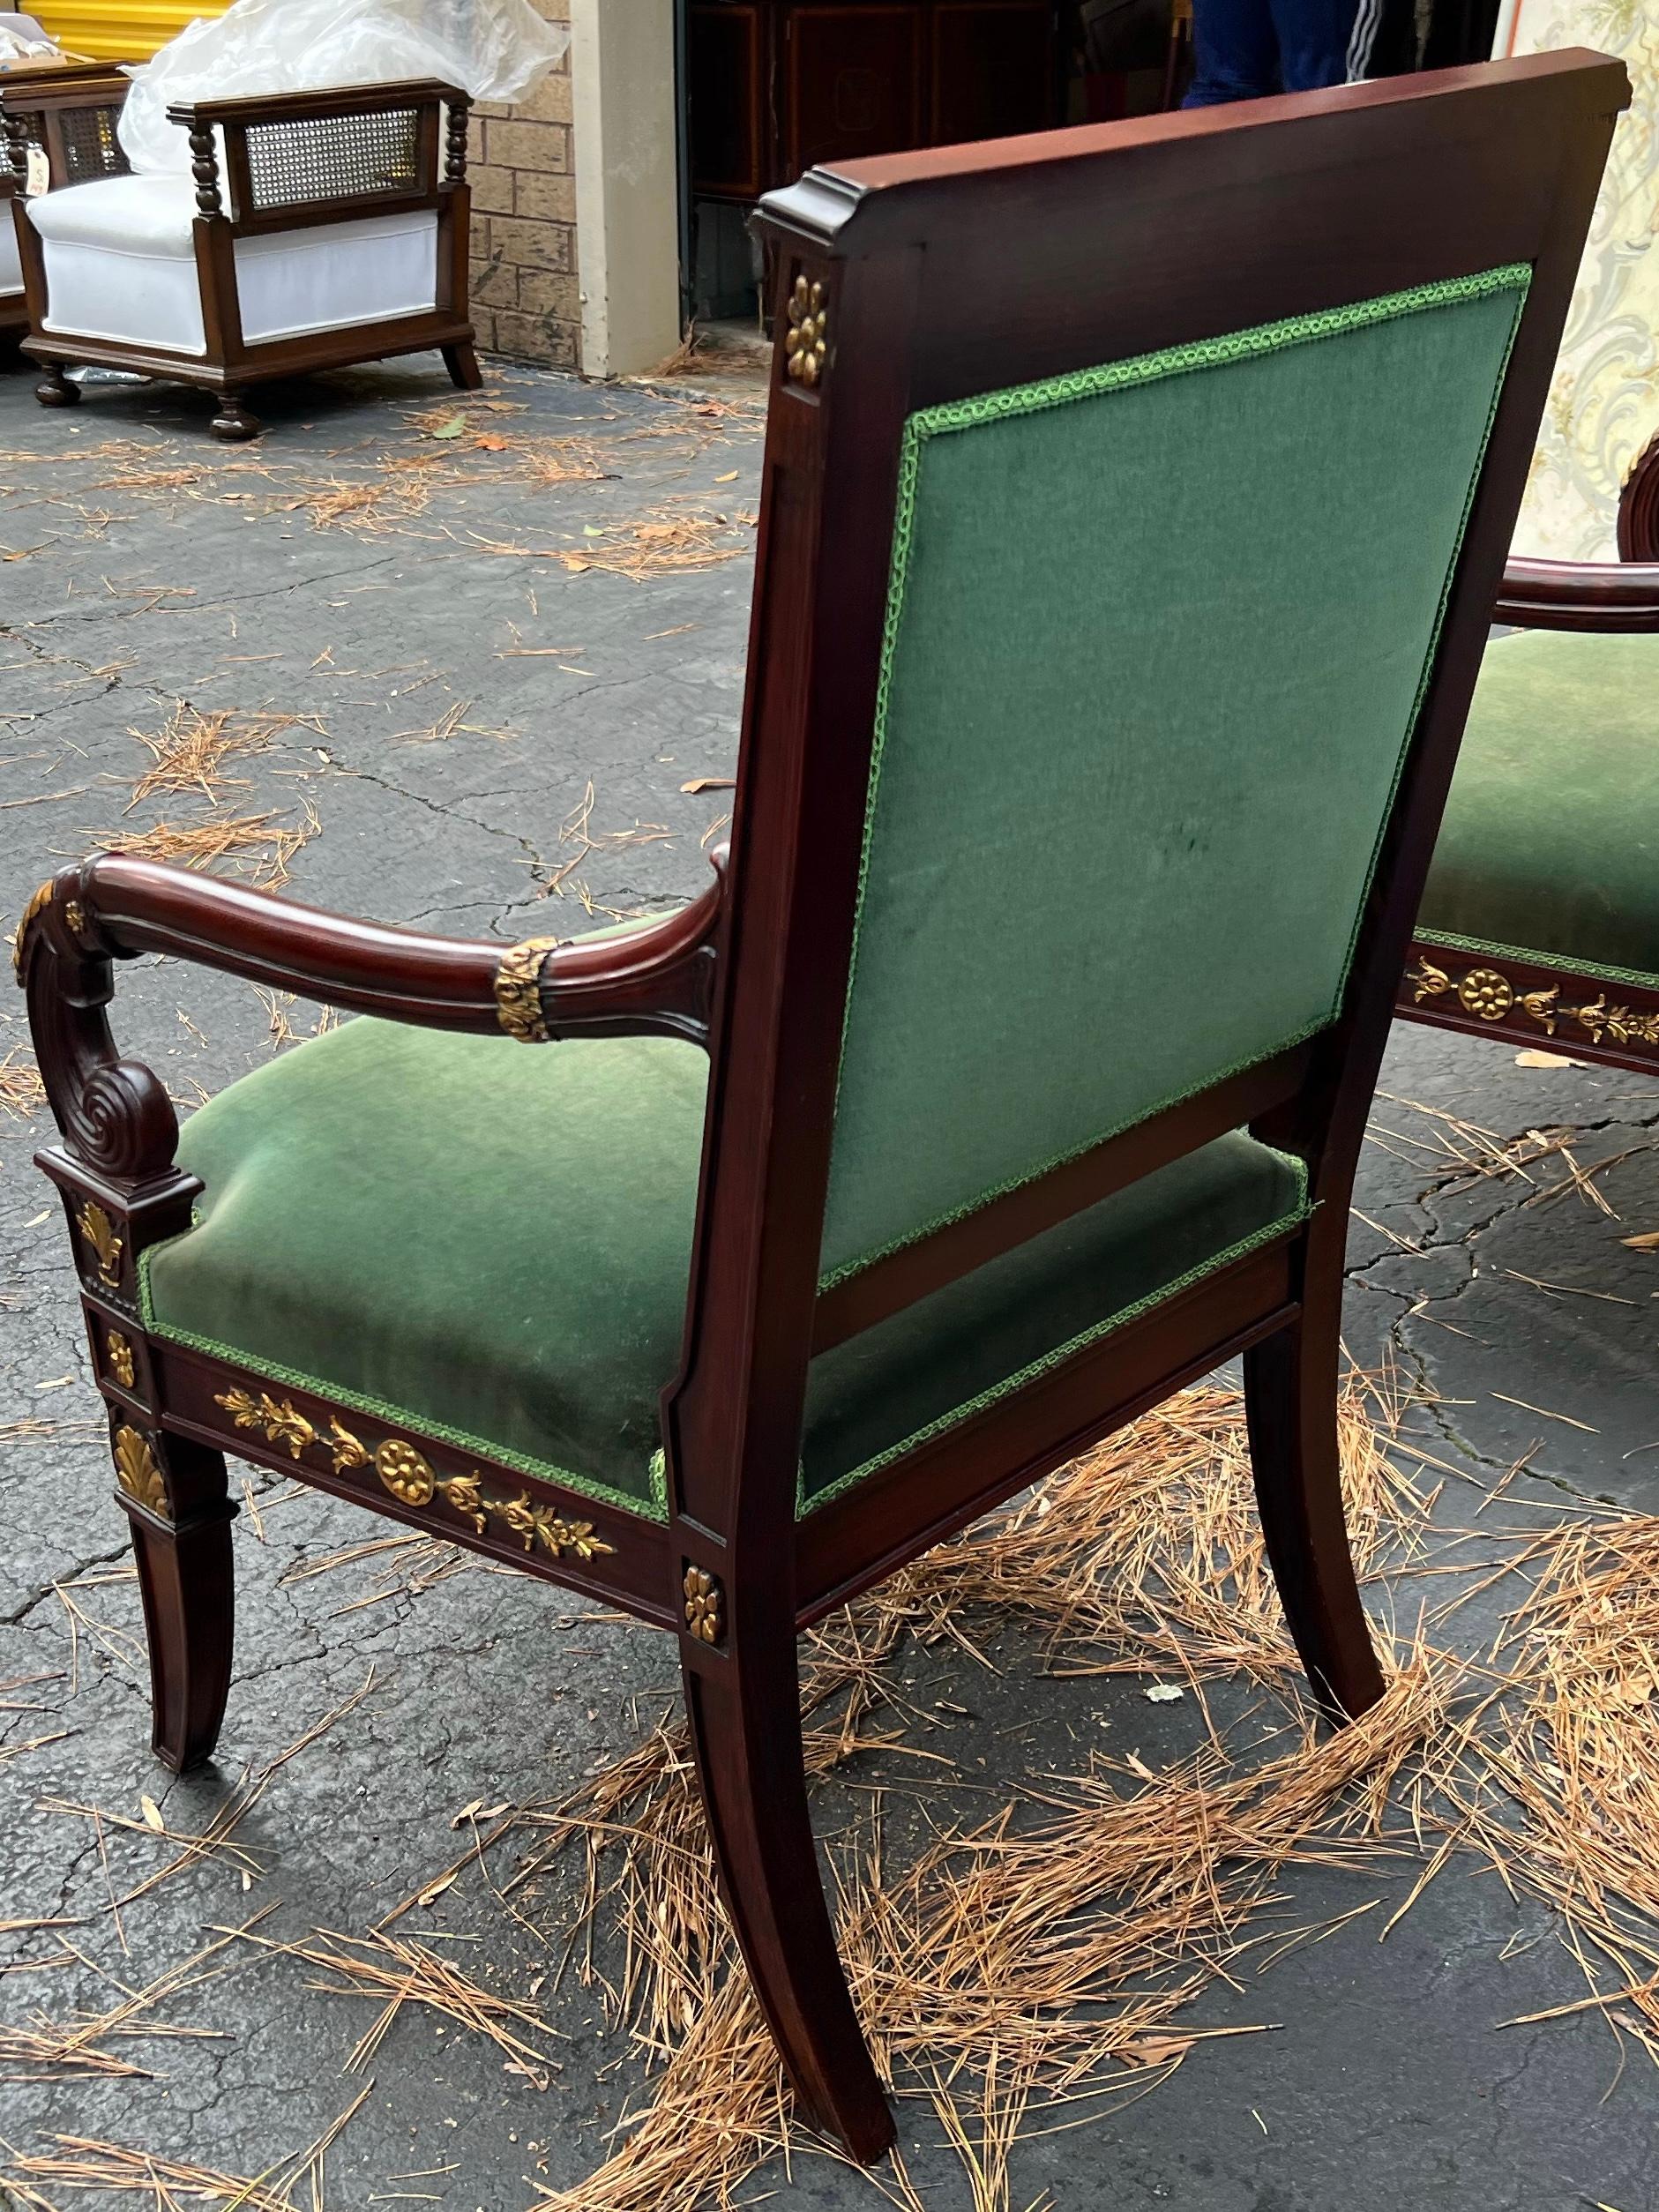 20th-C. Fruitwood and Giltwood Italian Bergere Chairs in Green Velvet, Pair In Good Condition For Sale In Kennesaw, GA